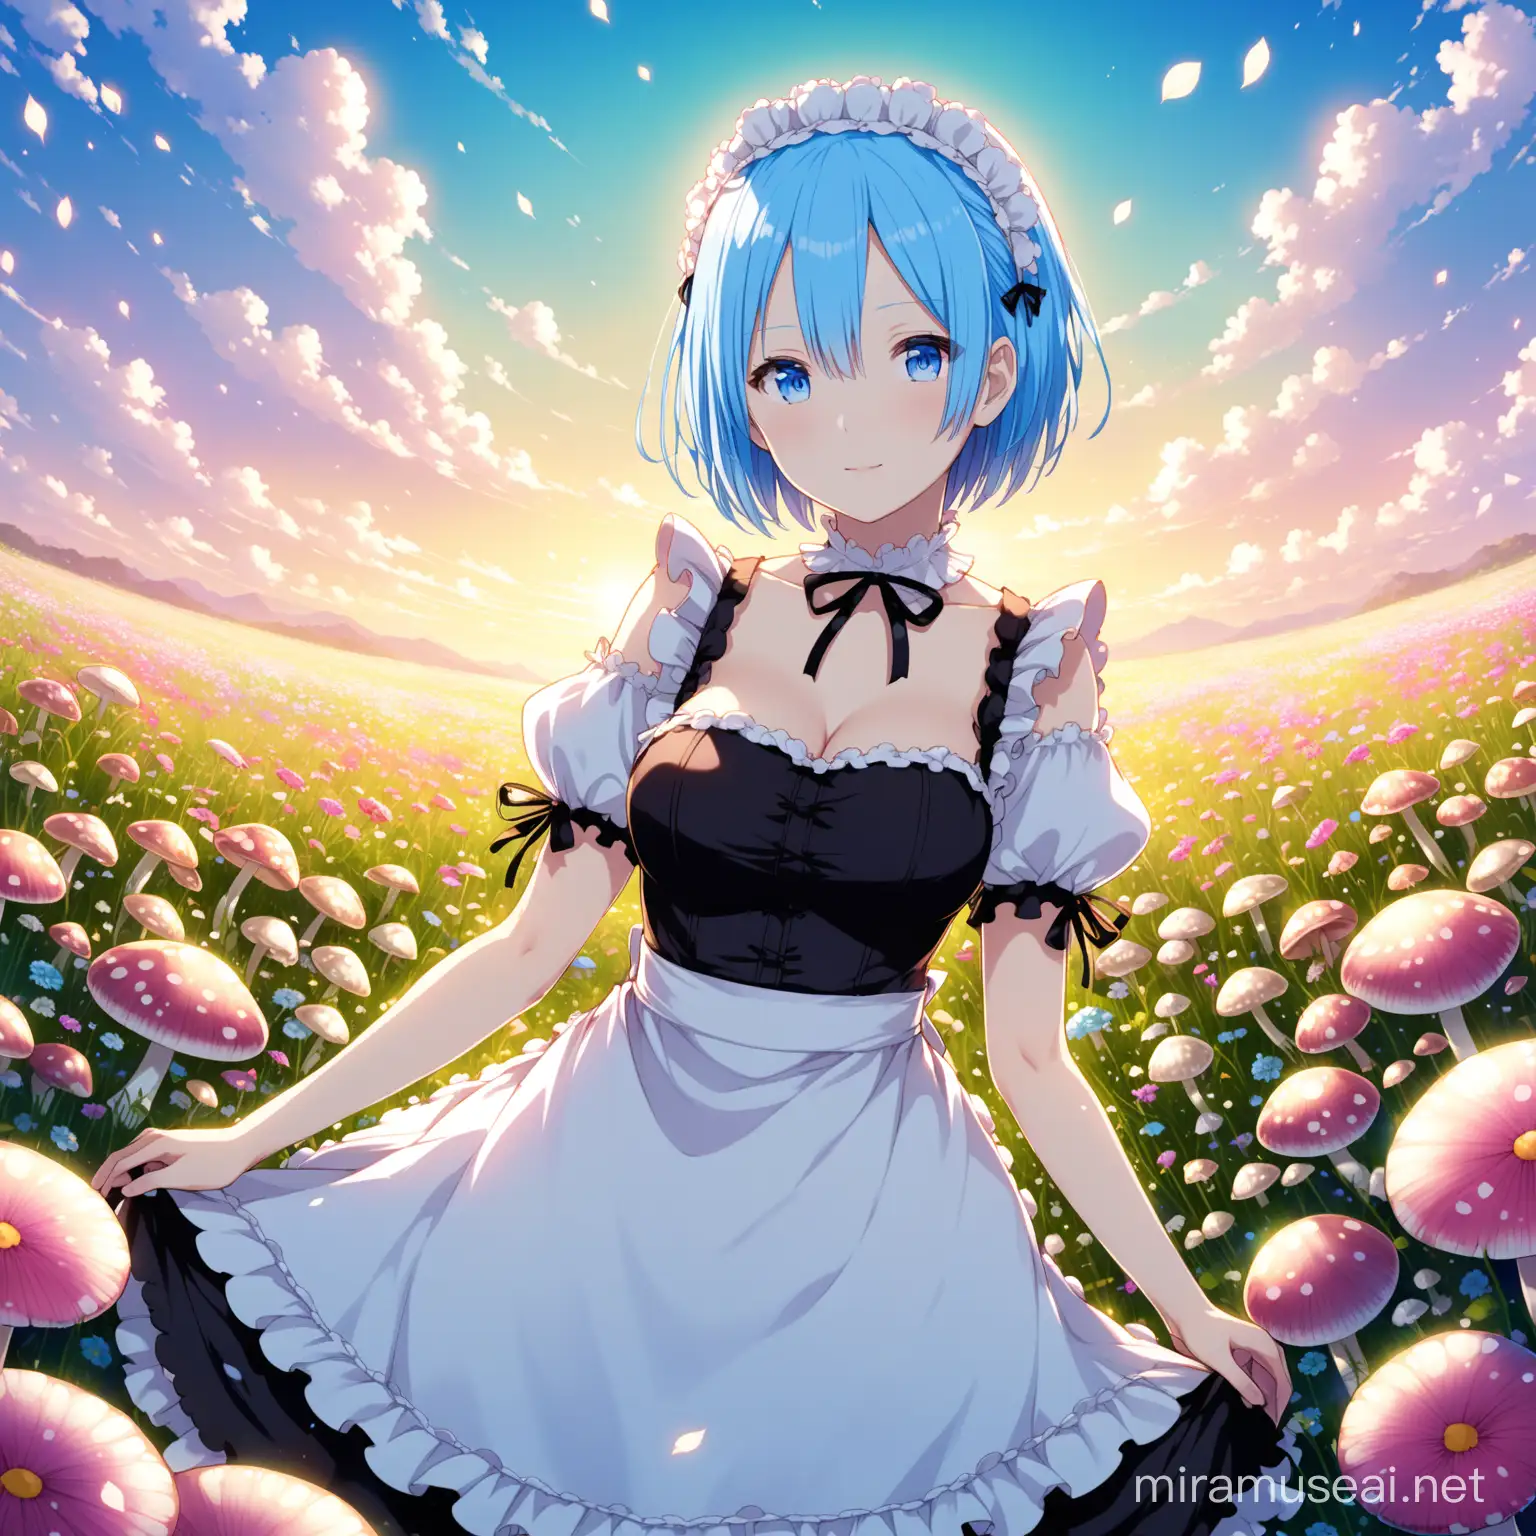 Anime Rem in Maid Outfit Posing in a Vibrant Flower Field